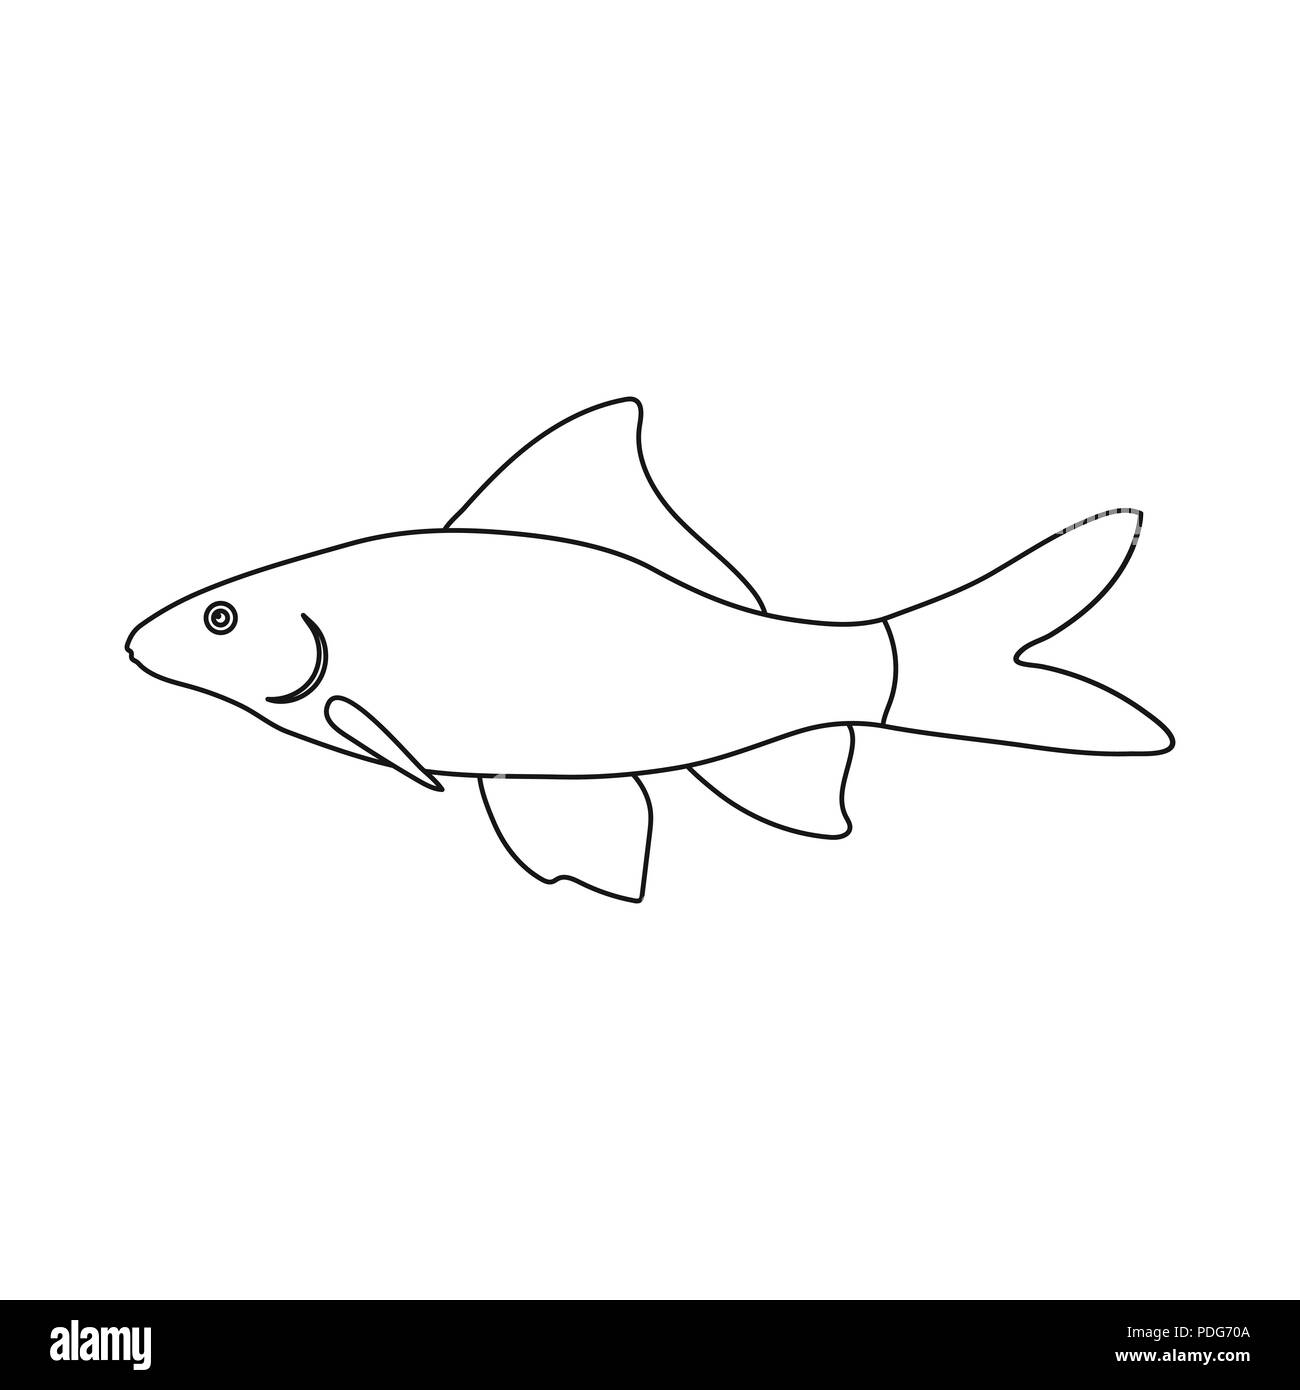 albino,alive,aquarium,bartel,bicolor,bottom,cartoon,catfish,detailed,epalzeorhynchos,epalzeorhynchus,fin,fire,fish,fishbowl,freshwater,gray,ground,icon,illustration,isolated,labeo,logo,marine,mouth,outline,rainbow,red,red-tailed,shark,symbol,tail,tailed,tropical,vector,water,wels,white, Vector Vectors , Stock Vector